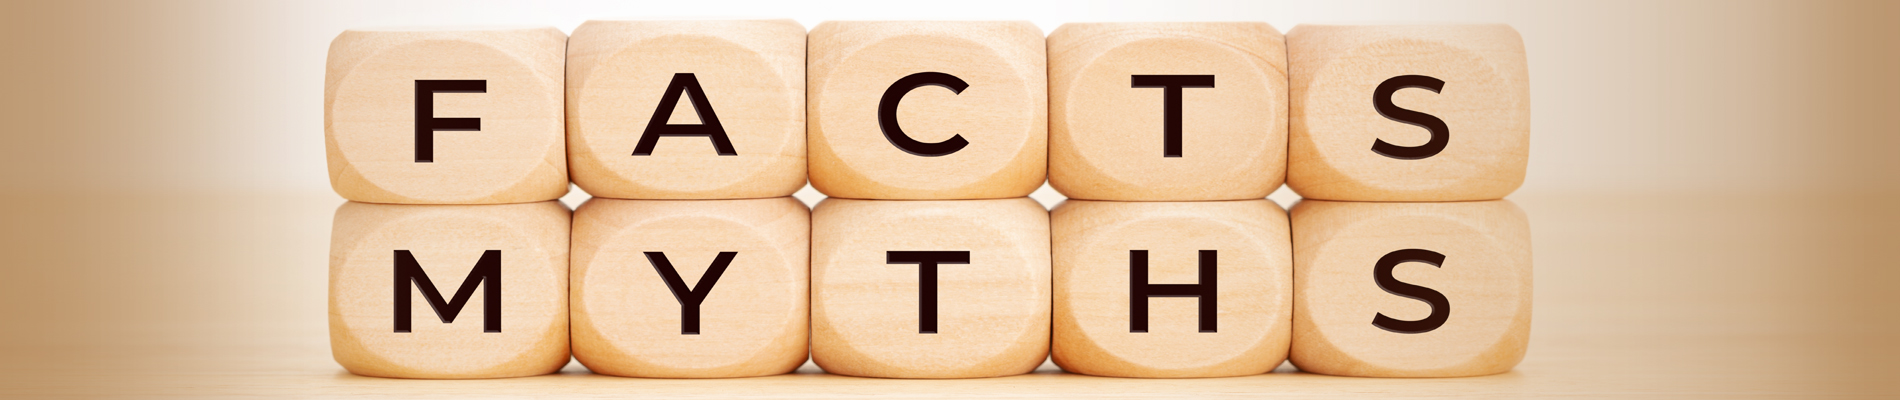 Wood blocks spelling out facts myths